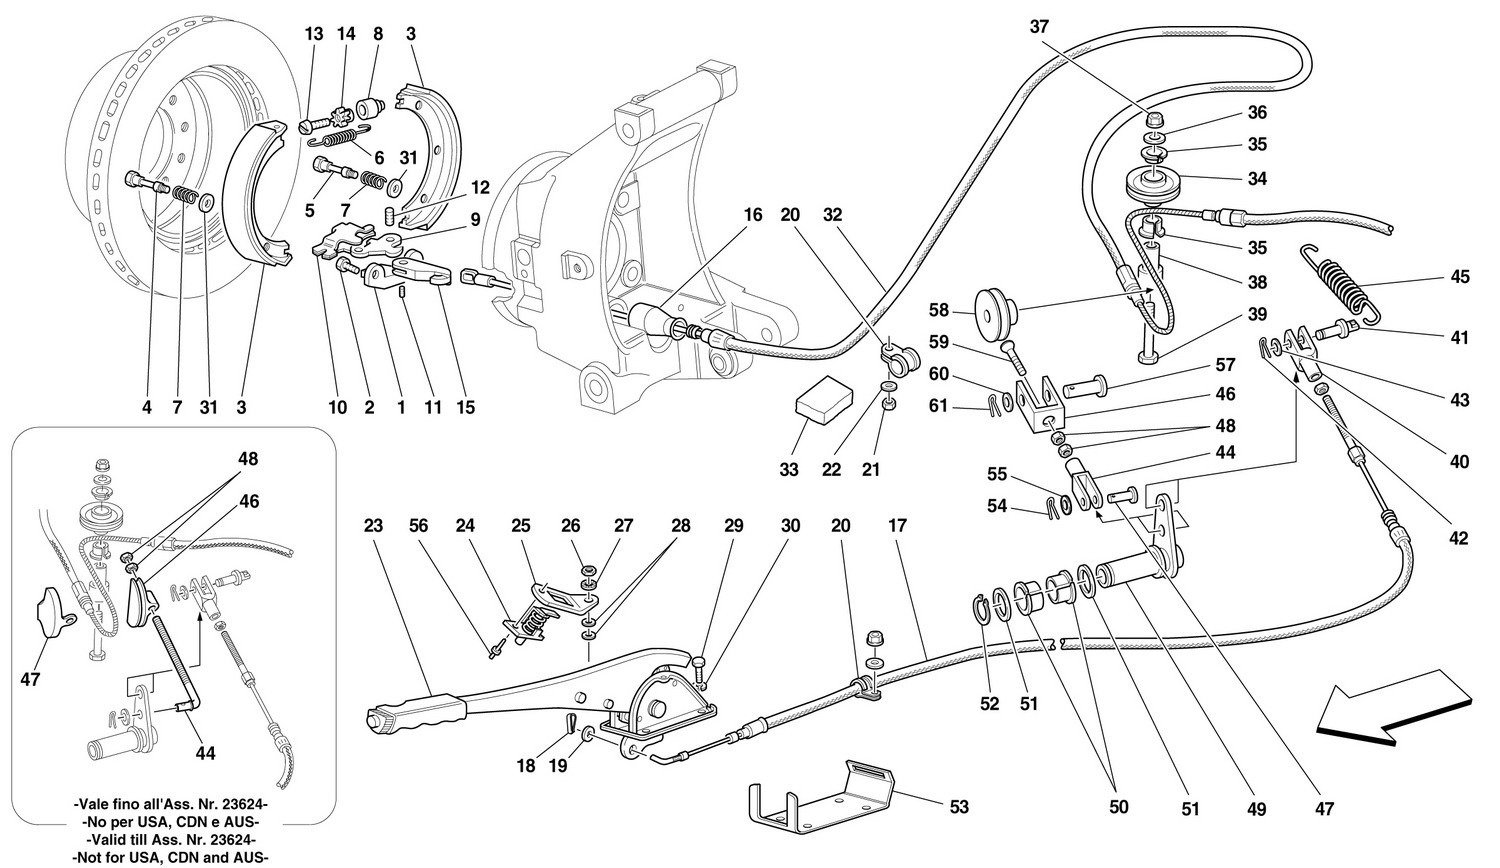 Schematic: Hand-Brake Control -Valid For 456 Gta